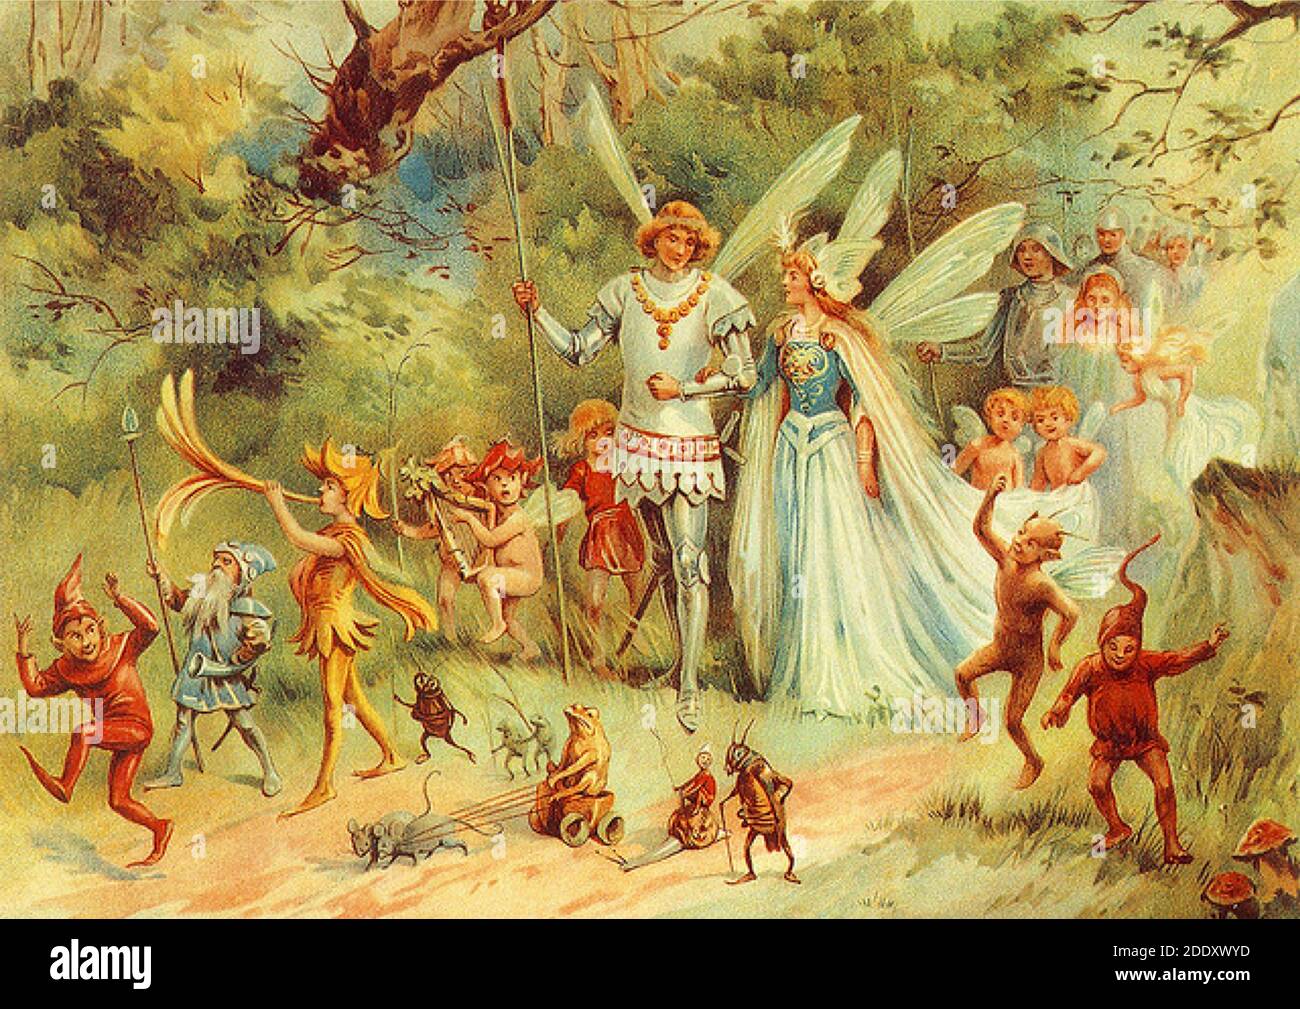 The fairy king and queen walk through the forest accompanied by their entourage of forest creatures. A fairy painting by unknown artist. Stock Photo